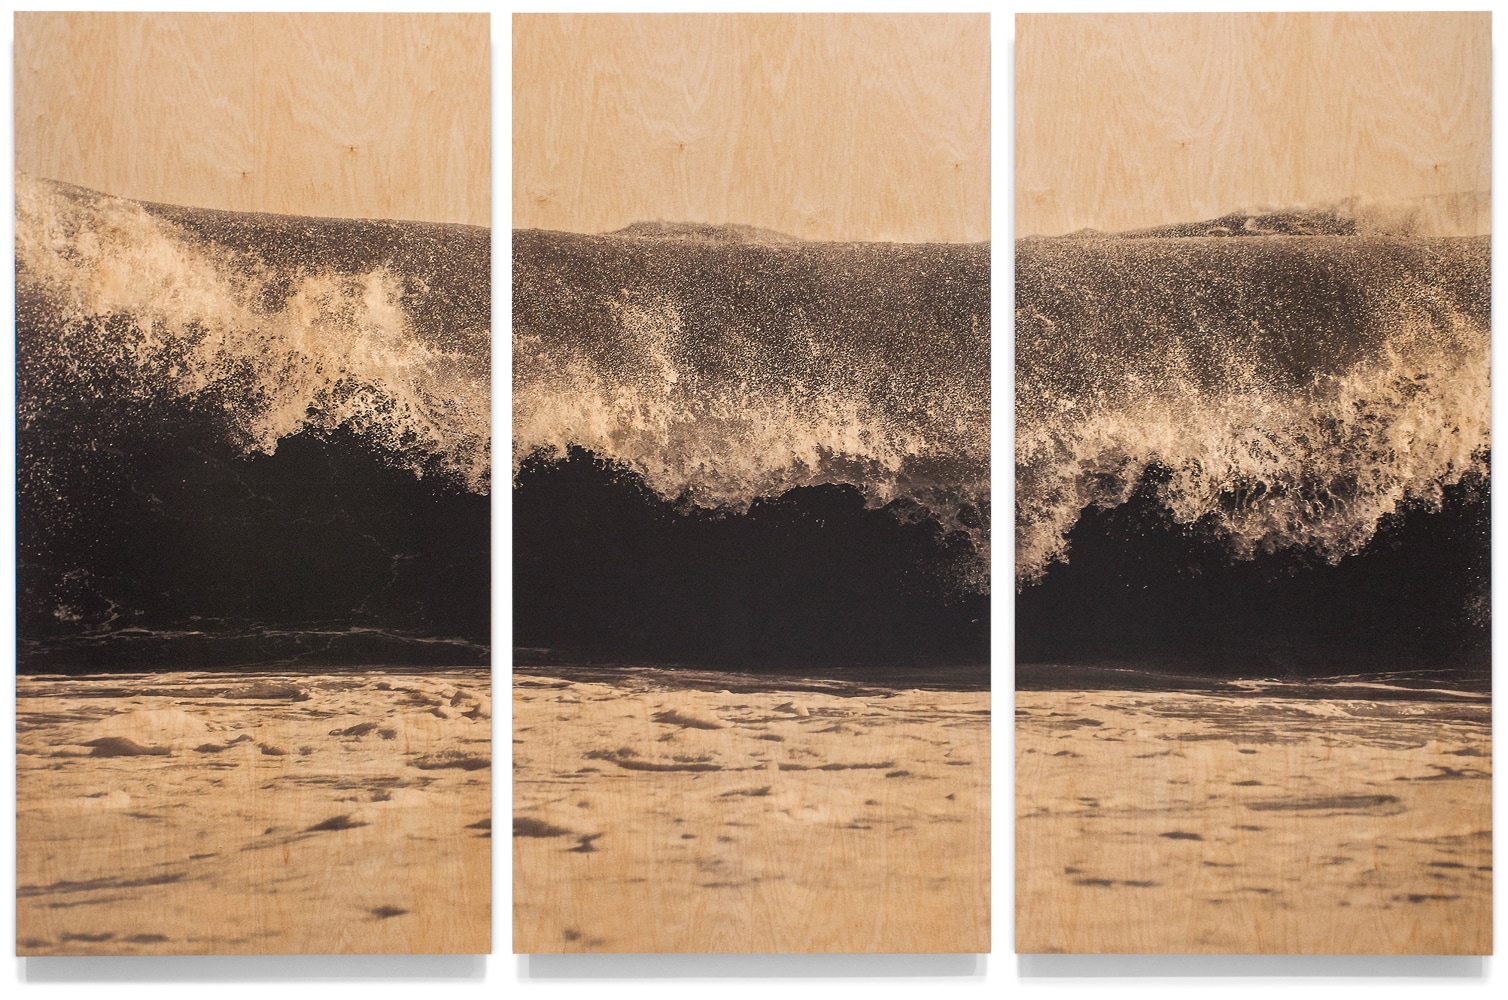 Wood Wave XLIX, triptych

UV cured ink on maple veneer 74 x 114&amp;quot;, three panels, 74 x 37&amp;quot; (panel size) 2015

UV cured ink on maple veneer 148 &amp;times; 225&amp;quot;, three panels, 148 x 74&amp;quot; (panel size) 2017

&amp;nbsp;